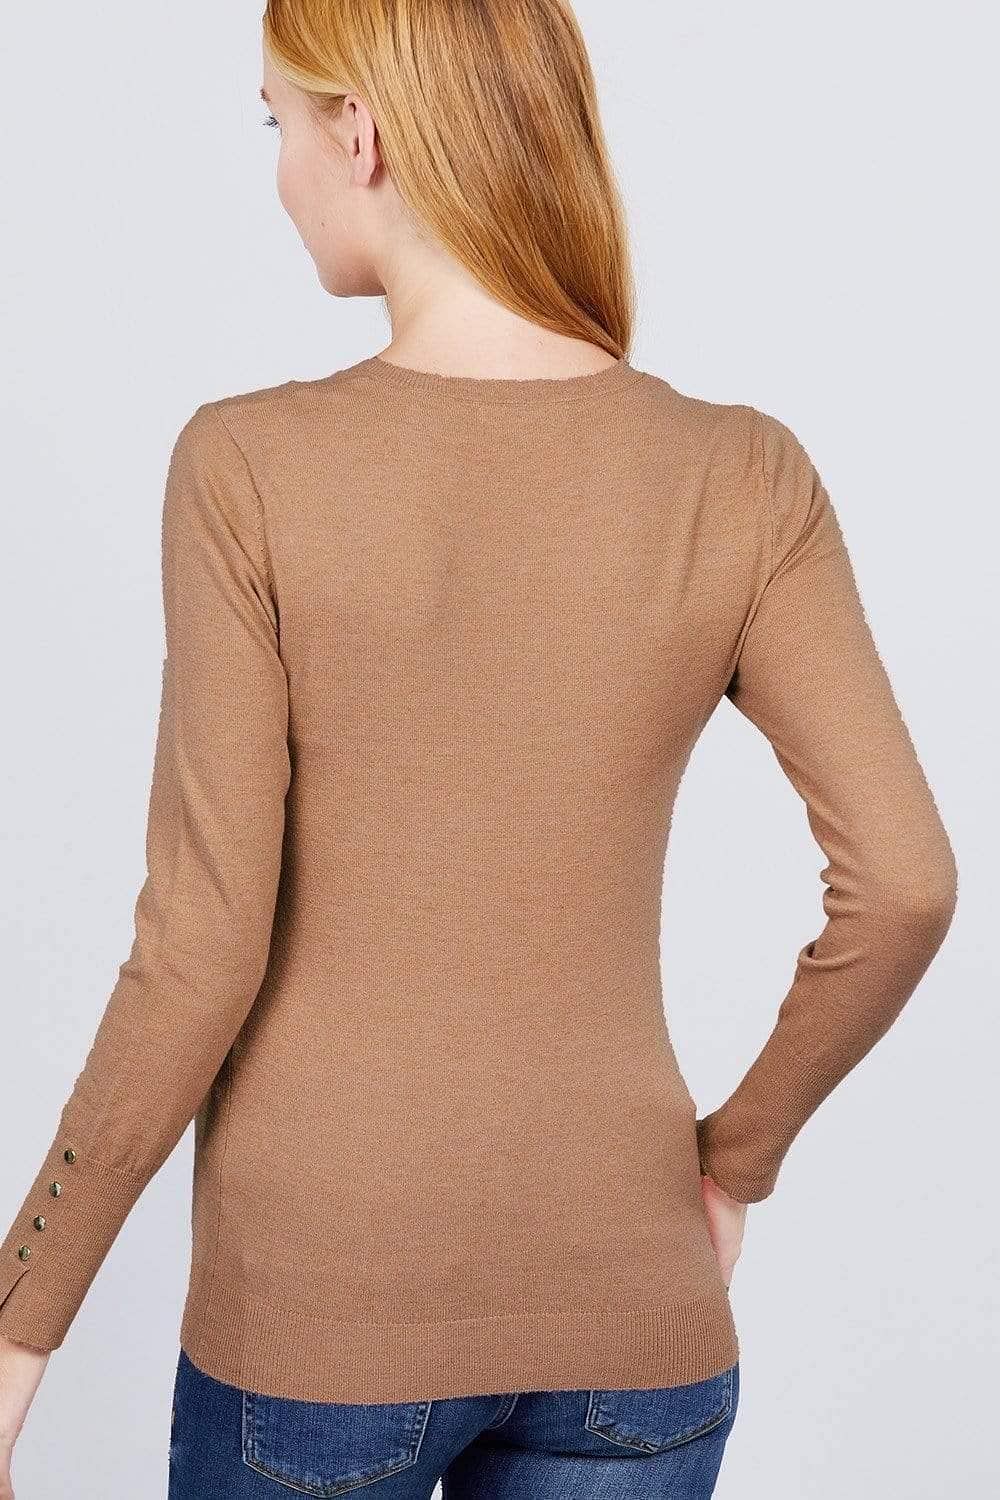 Brown Long Sleeve V-Neck Sweater - Shopping Therapy, LLC 